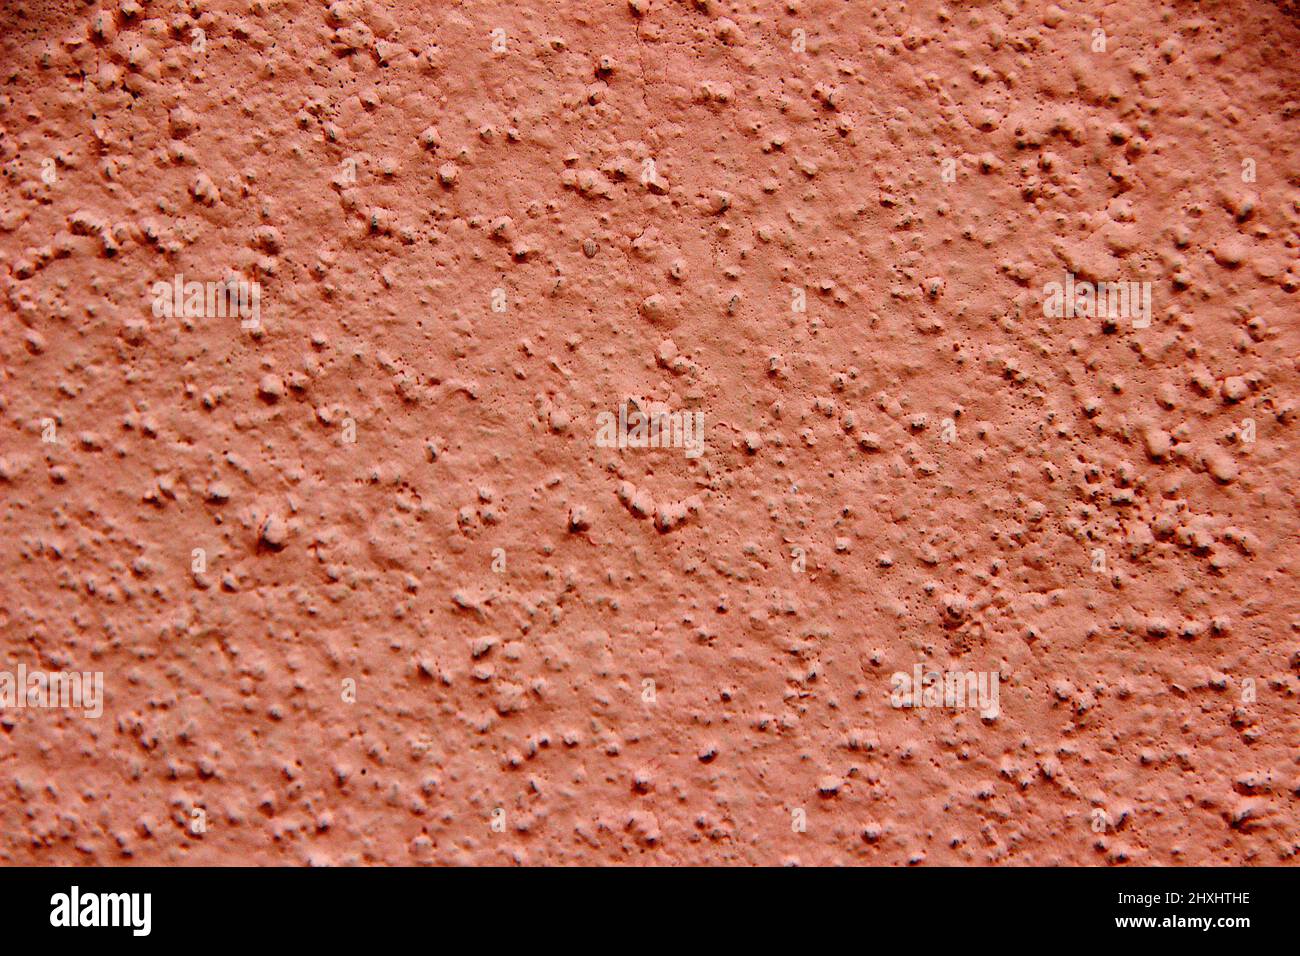 Close-up of pink painted concrete wall showing coarse sandy grains Stock Photo